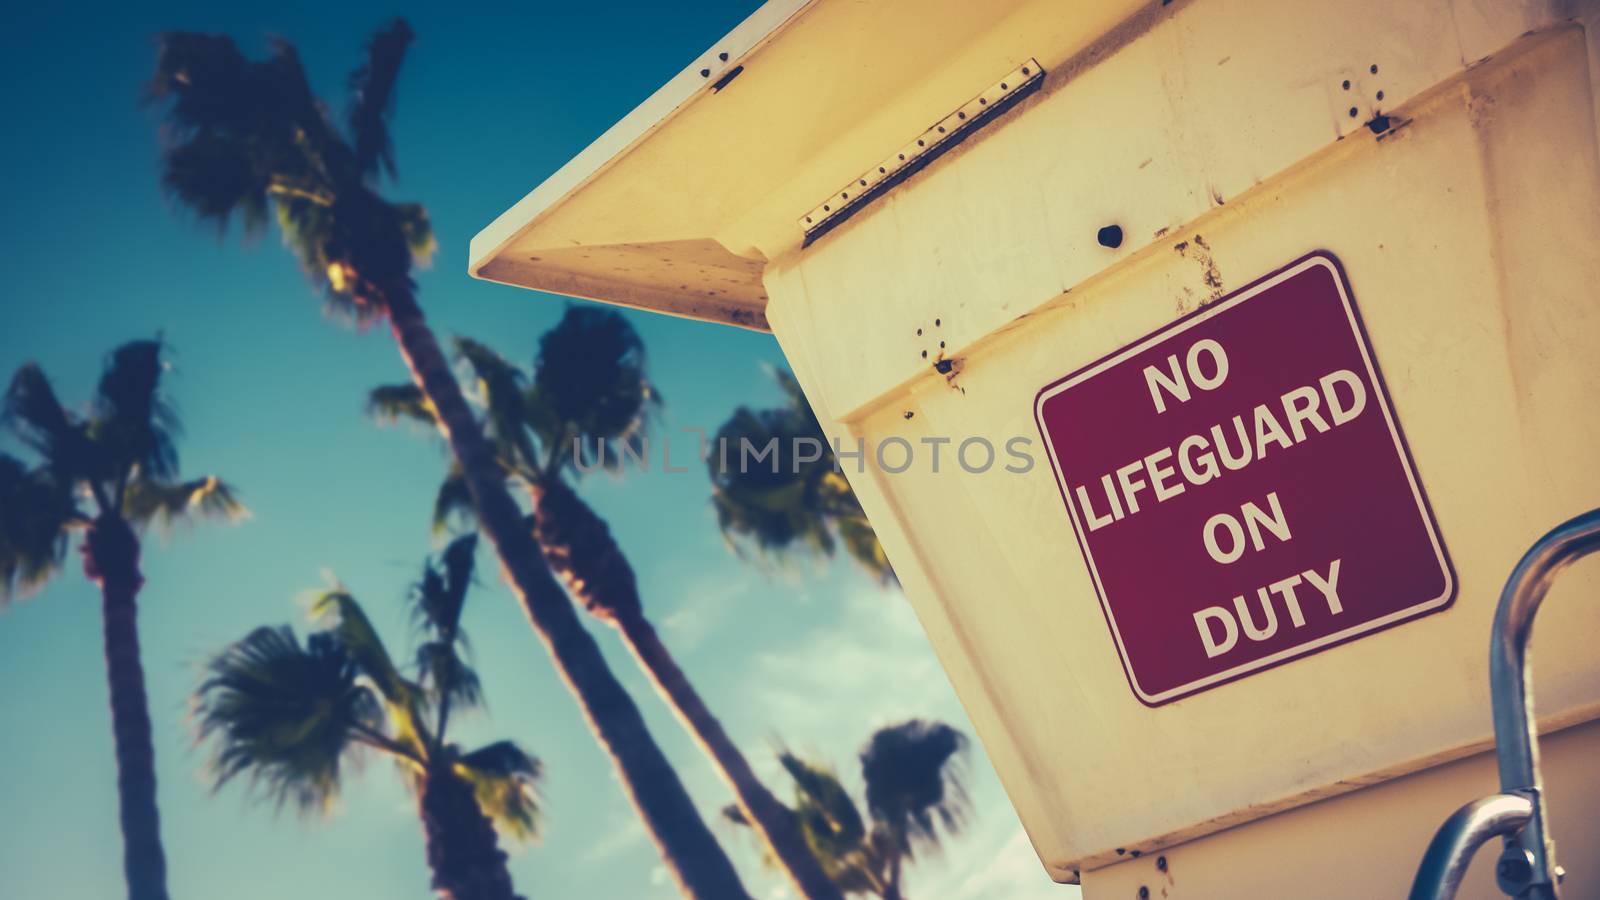 Retro Image Of A Lifeguard Station Or Tower On A Beach In California With Palm Trees